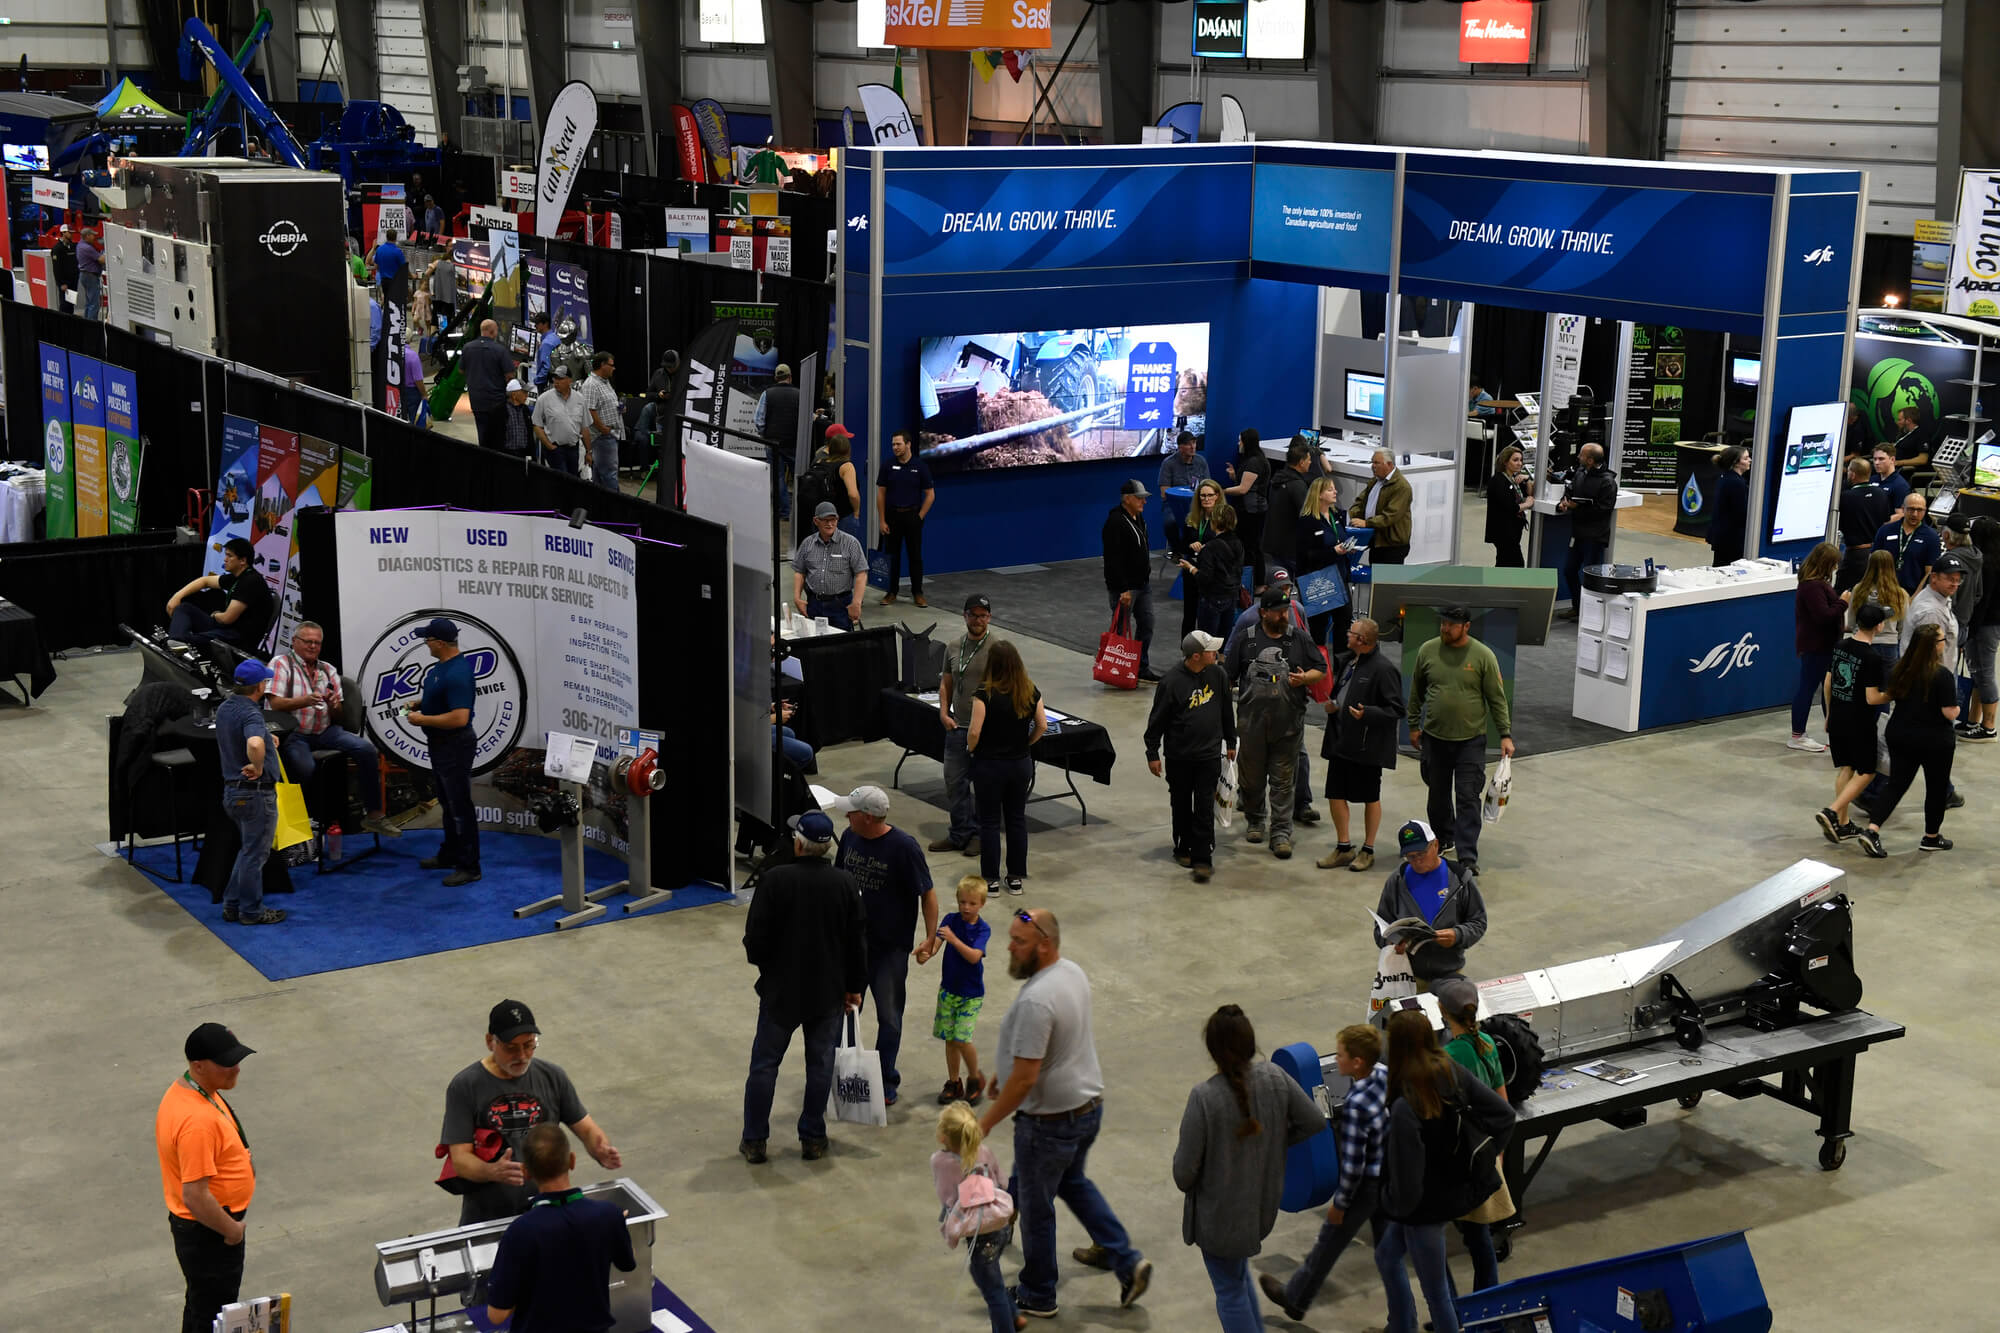 Overhead view of the trade show hall at Canada's Farm Show Regina